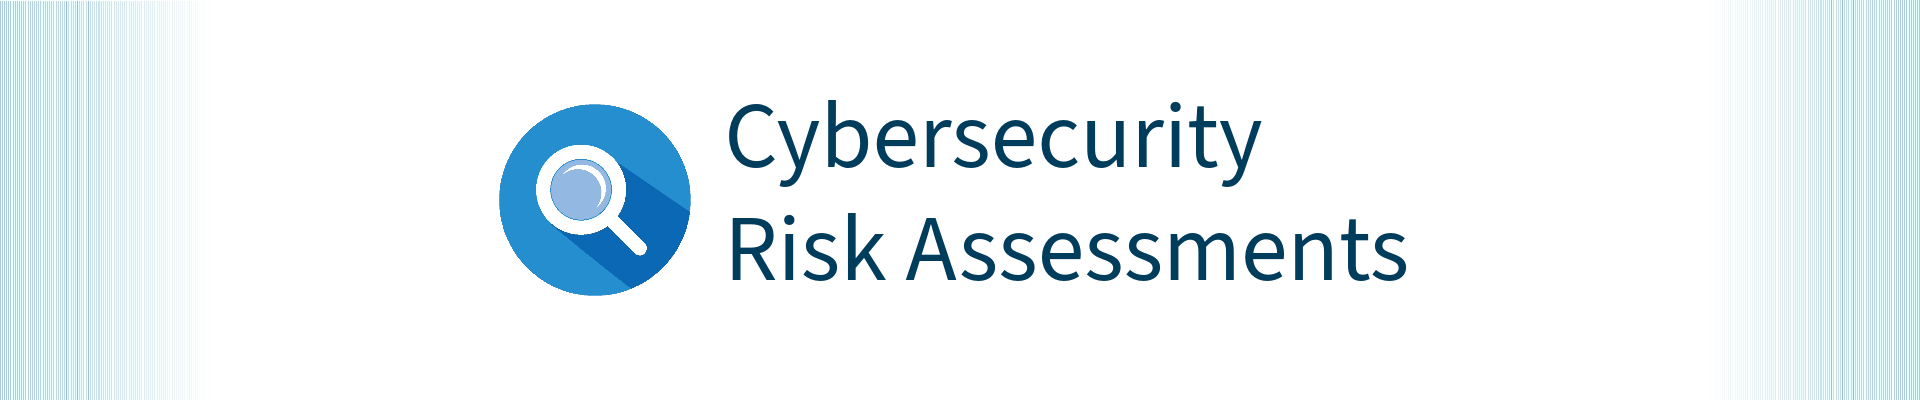 Cybersecurity Risk Management Banner